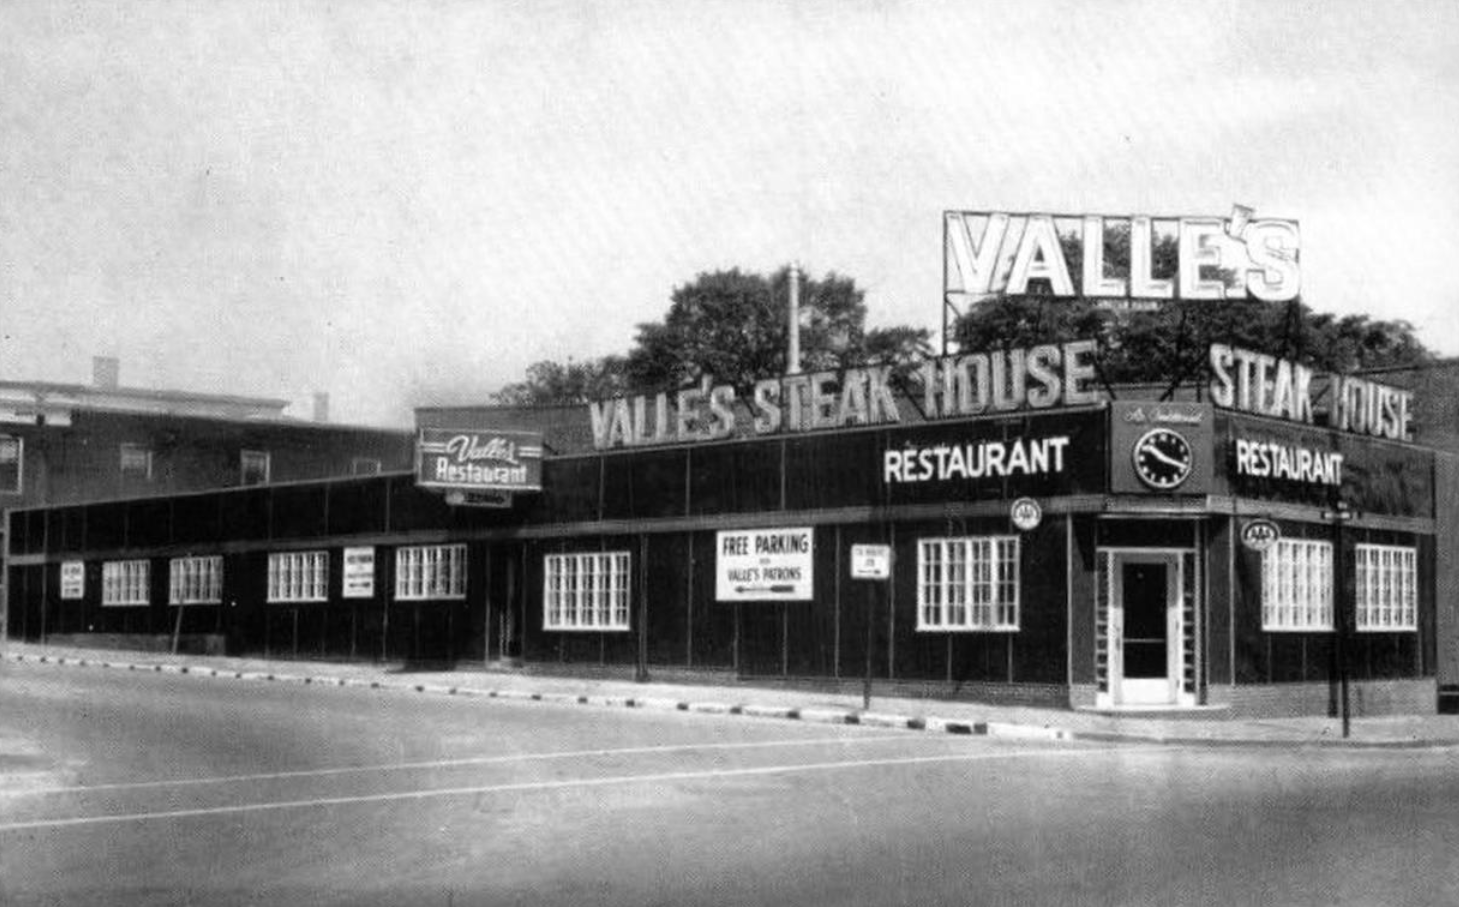 Valle's Steak House restaurant storefront, sourced from Facebook